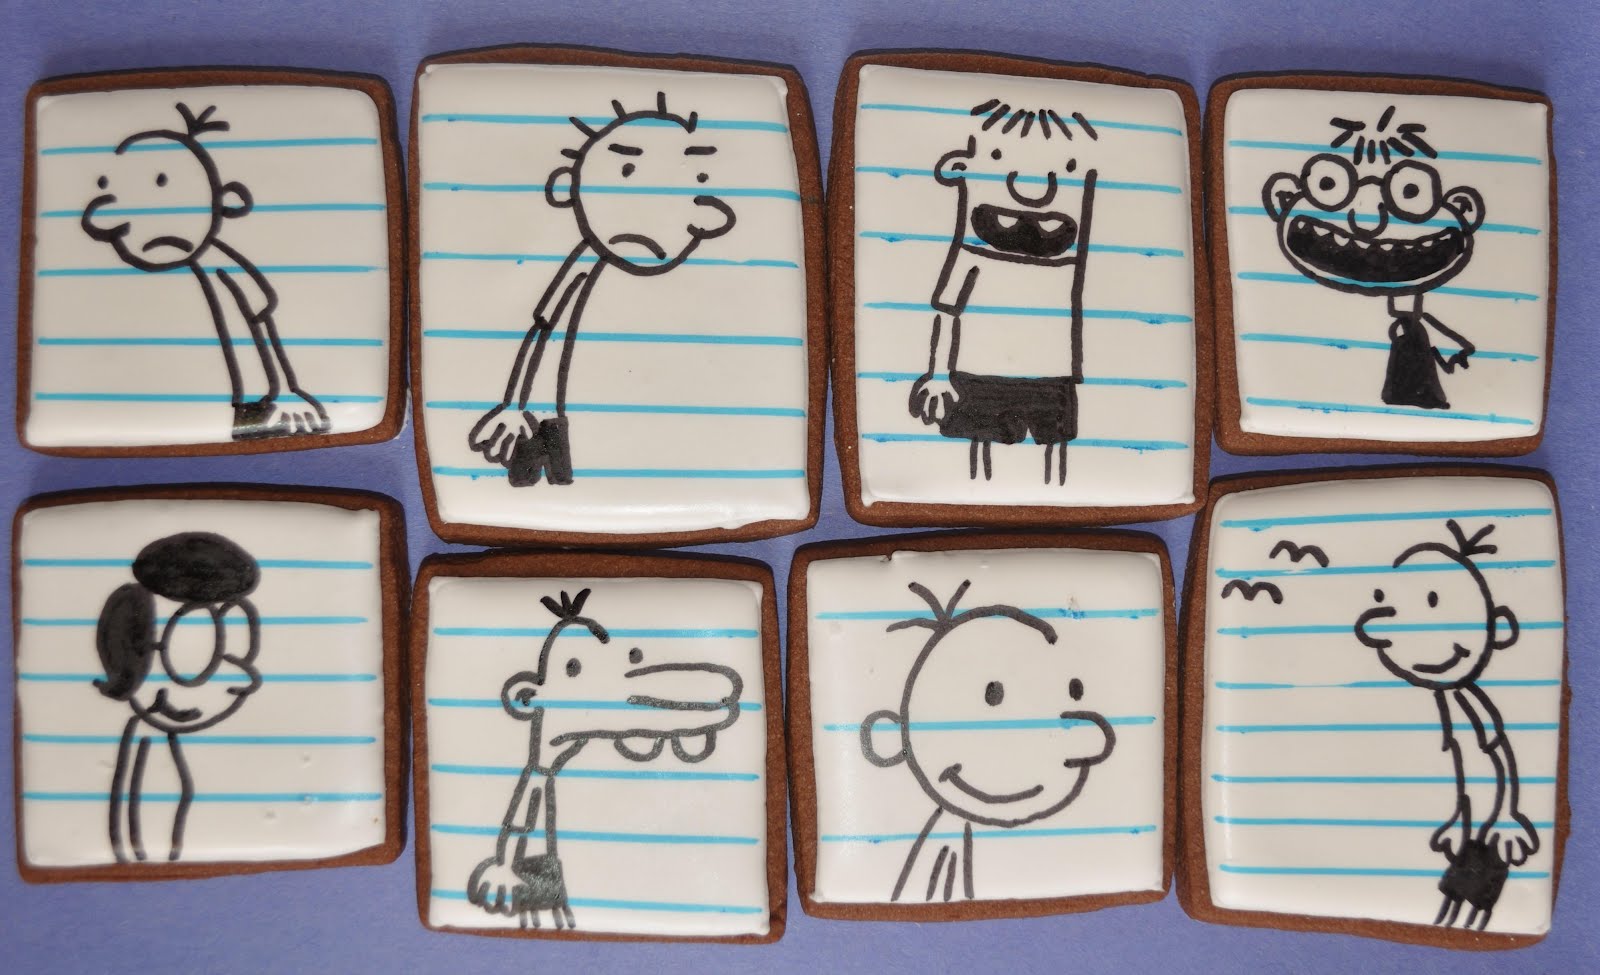 How to make Diary of a Wimpy Kid Cookies - Suz Daily